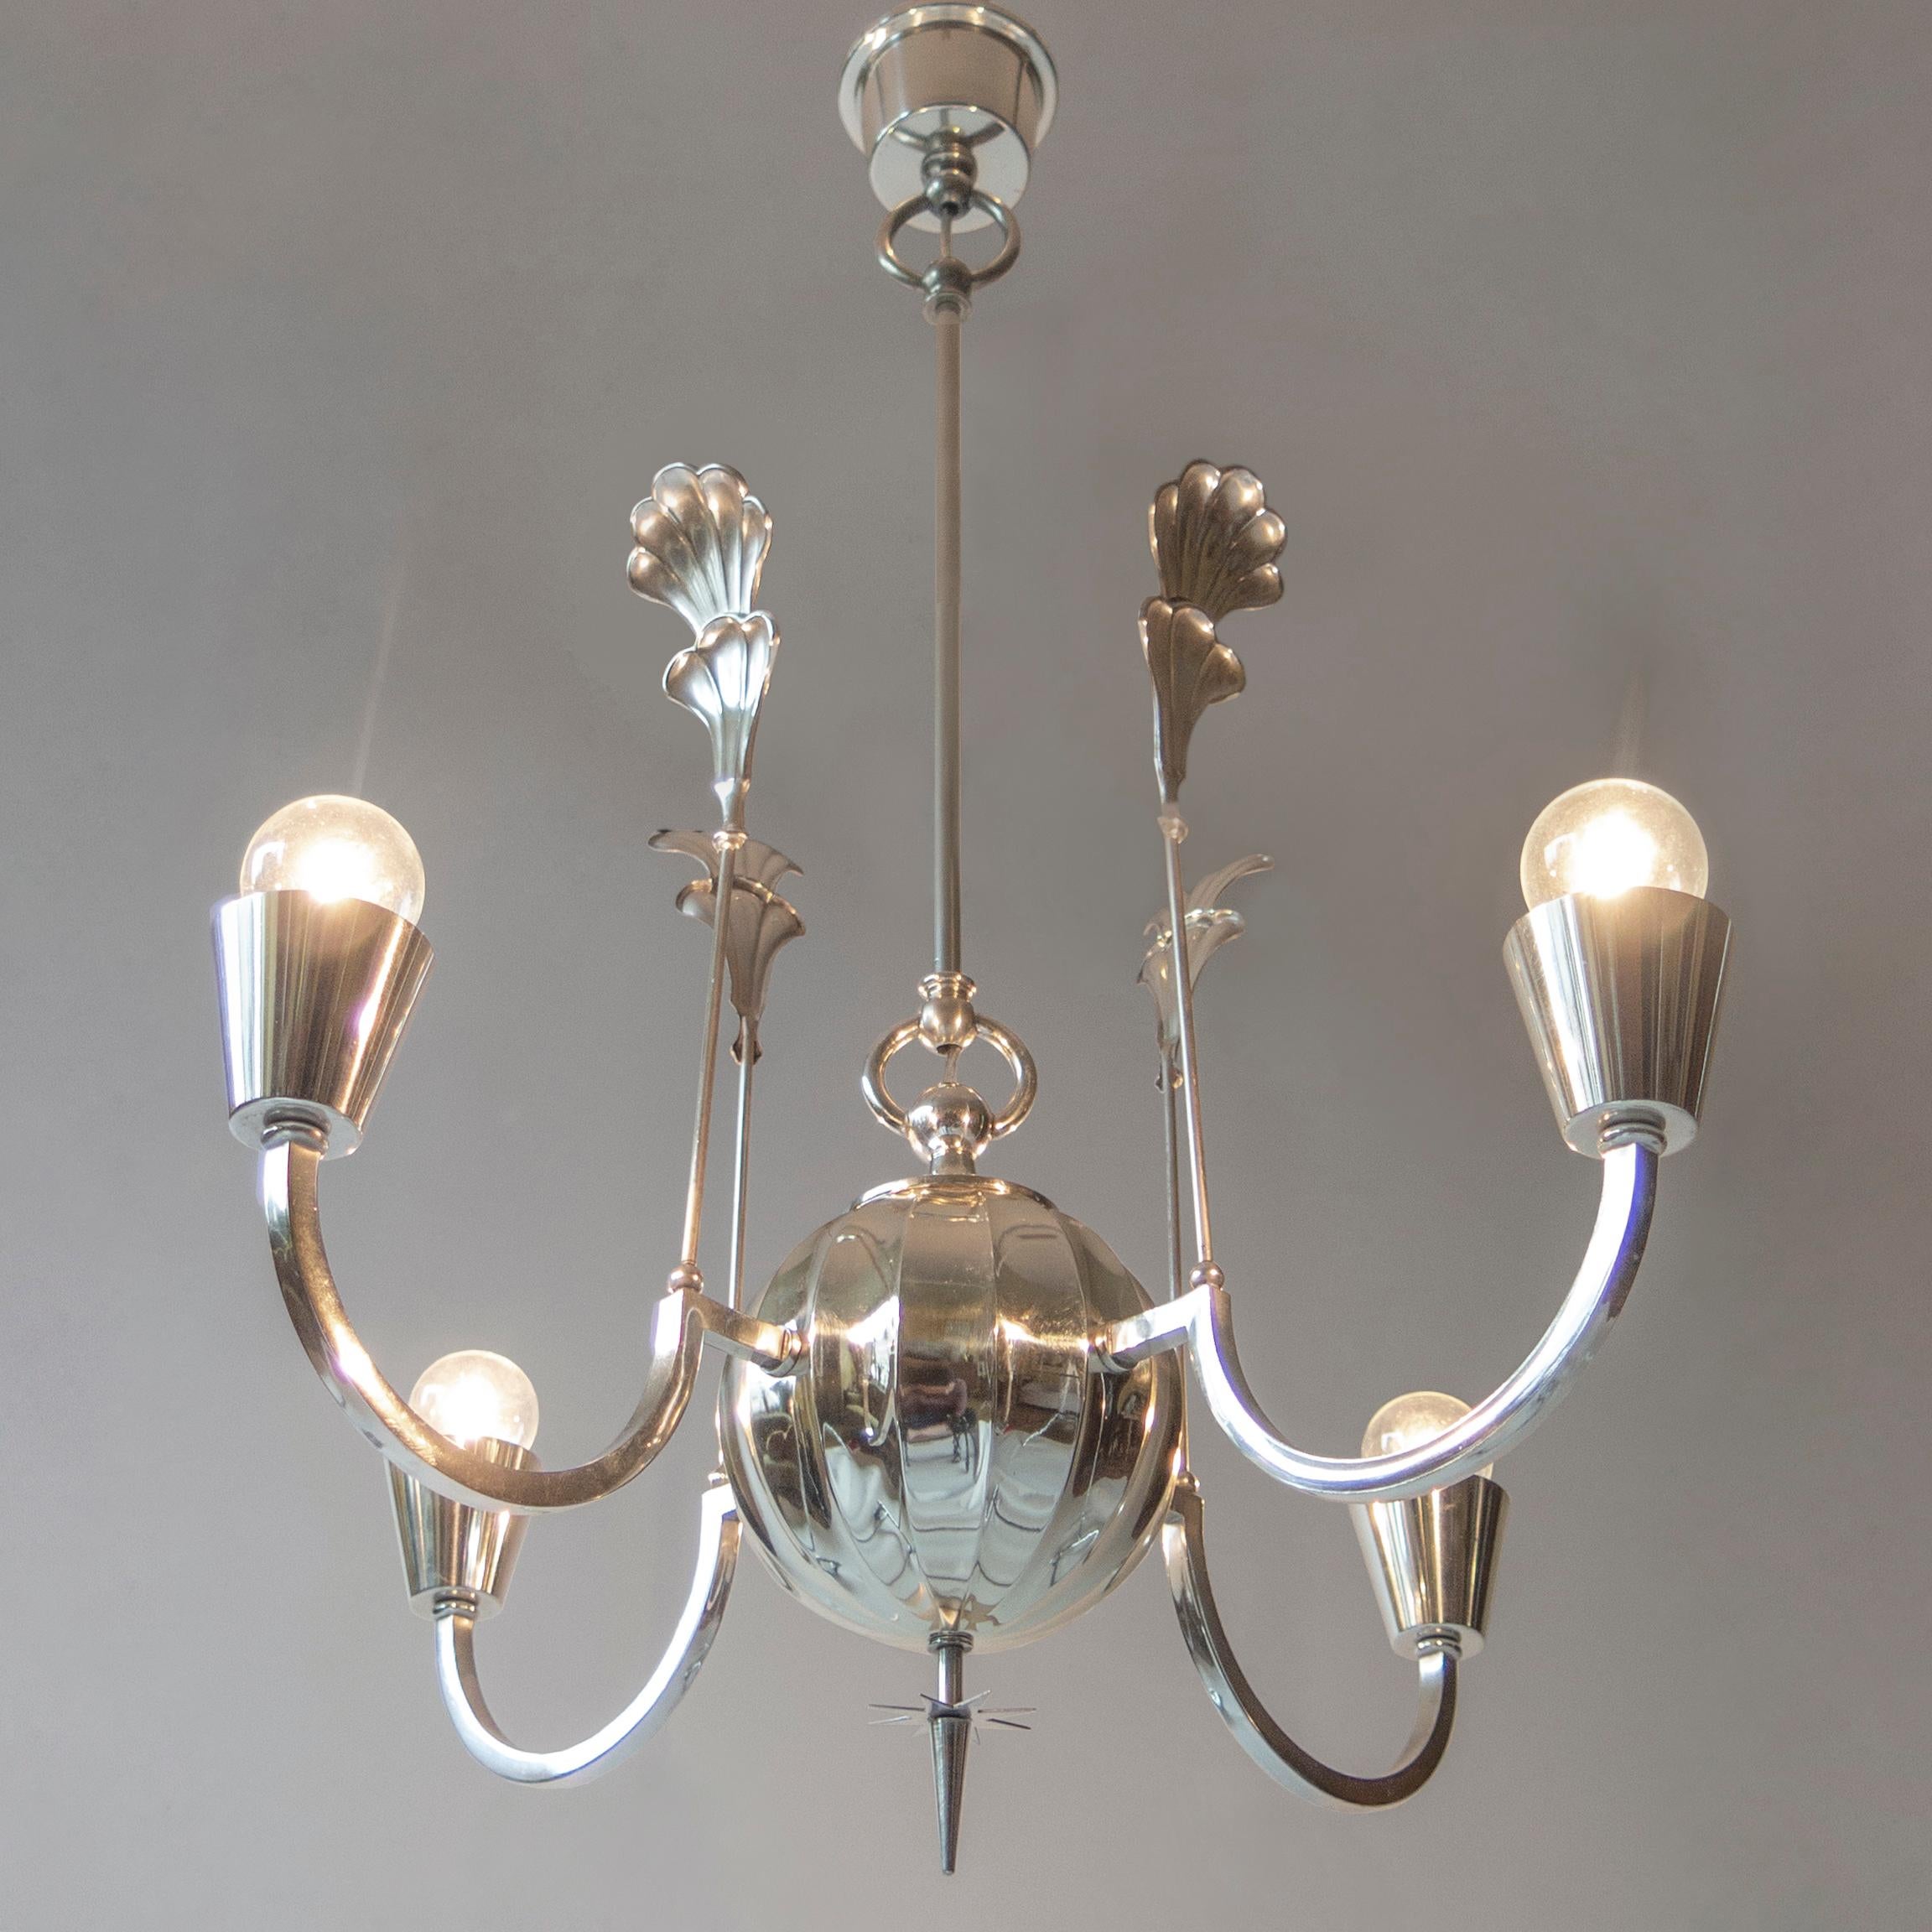 Design attributed to the iconic Swedish lighting designer Elis Bergh and expertly crafted by the preeminent Swedish metalworker C.G. Hallberg. The tapering canopy, above ring fasteners and a central hanging rod, the scalloped and spherical body